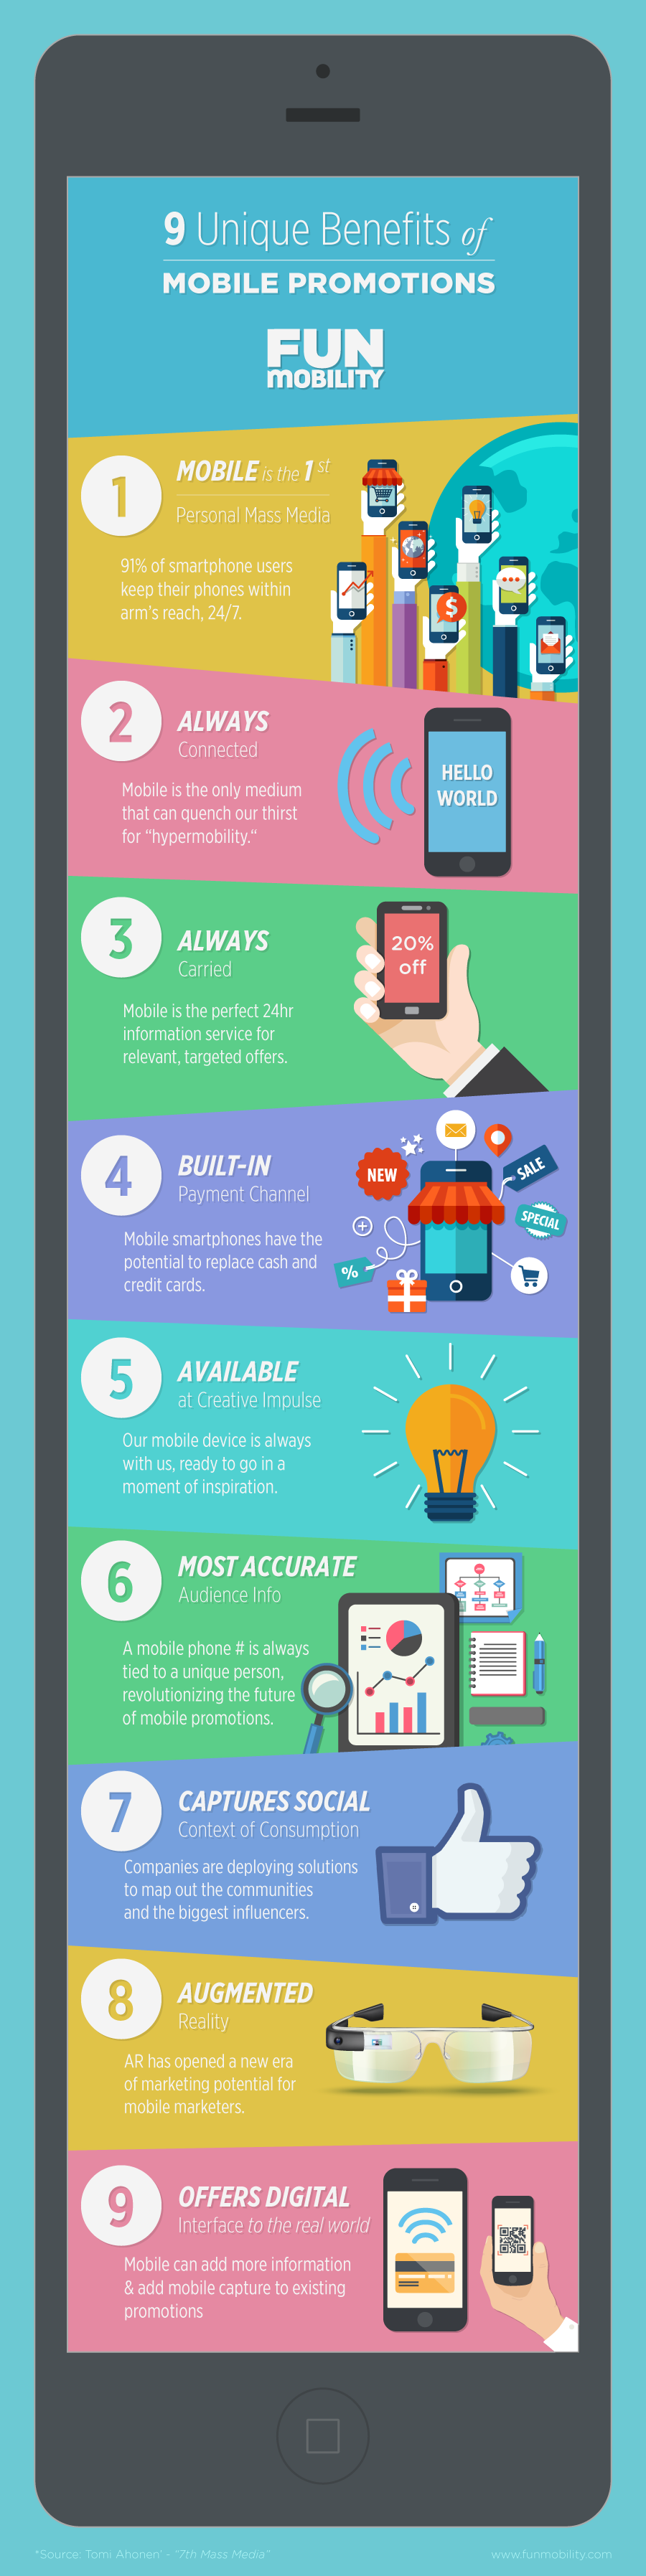 Infographic: 9 Unique Benefits of Mobile Promotions & Mobile Marketing